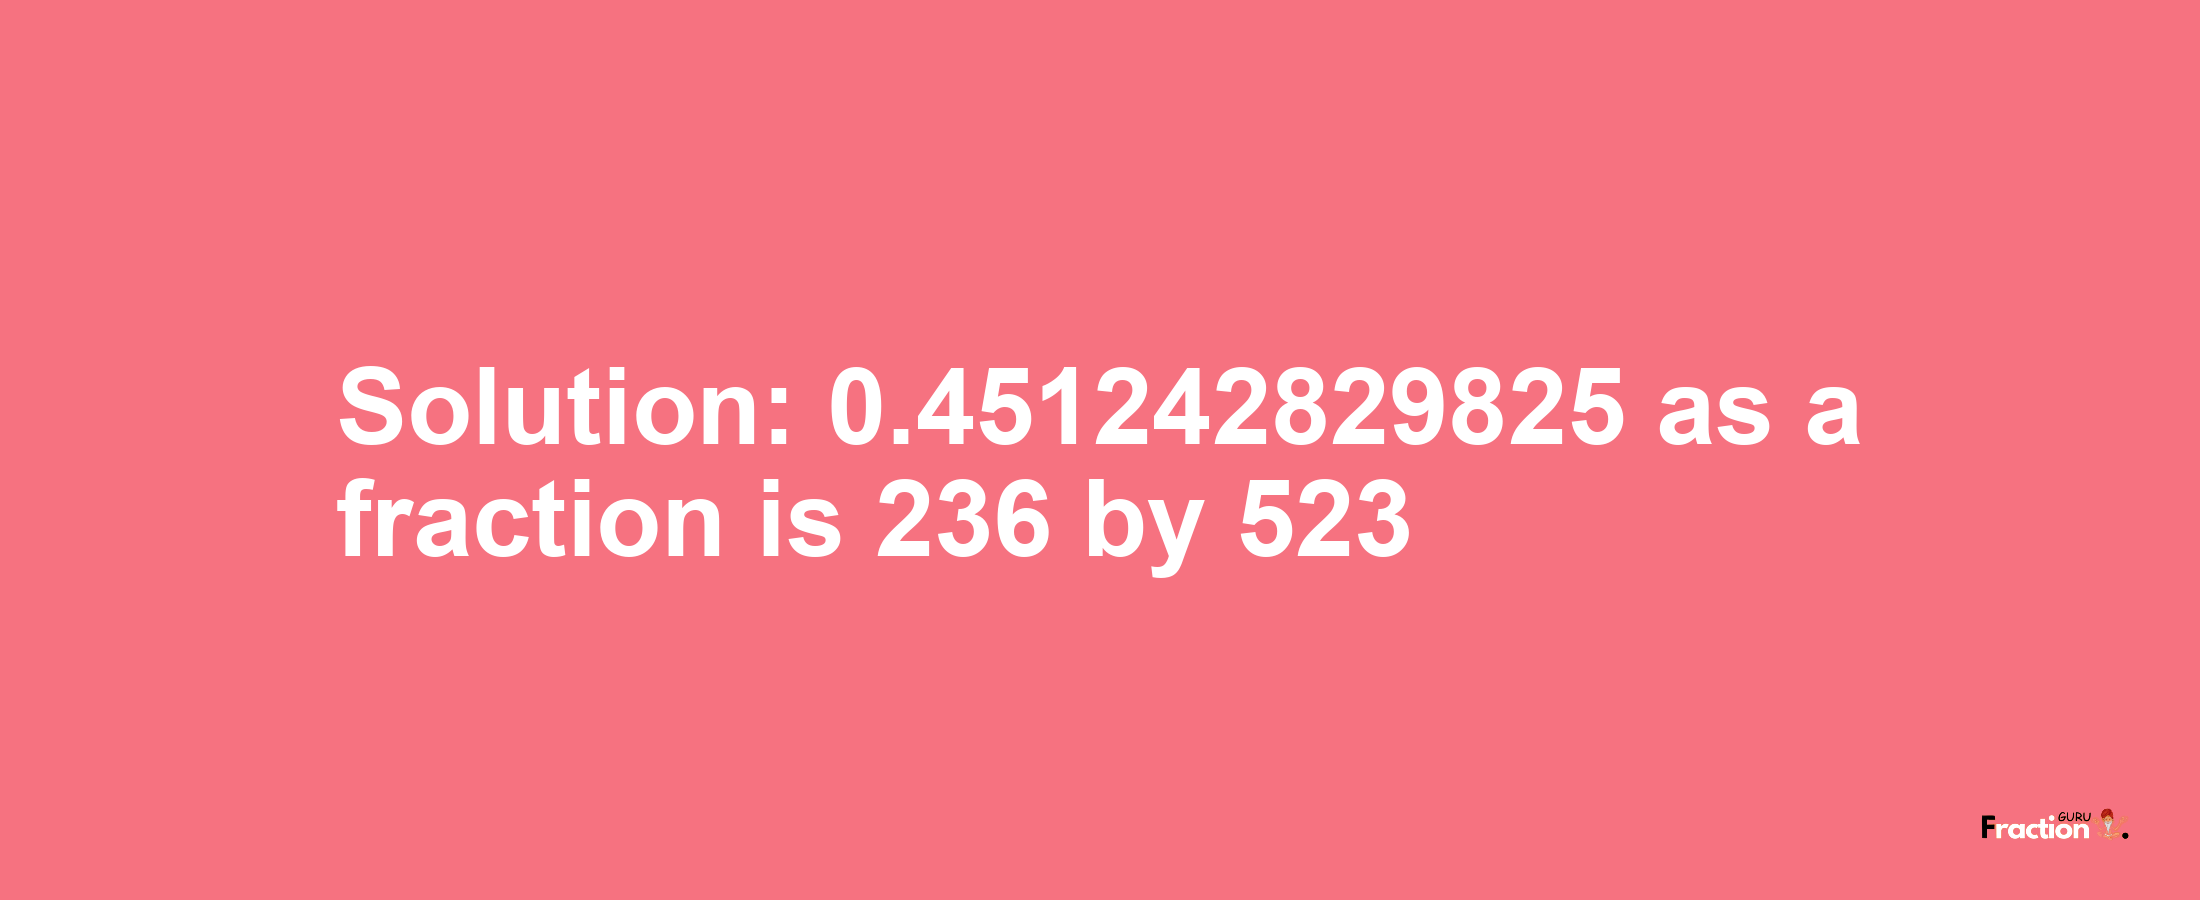 Solution:0.451242829825 as a fraction is 236/523